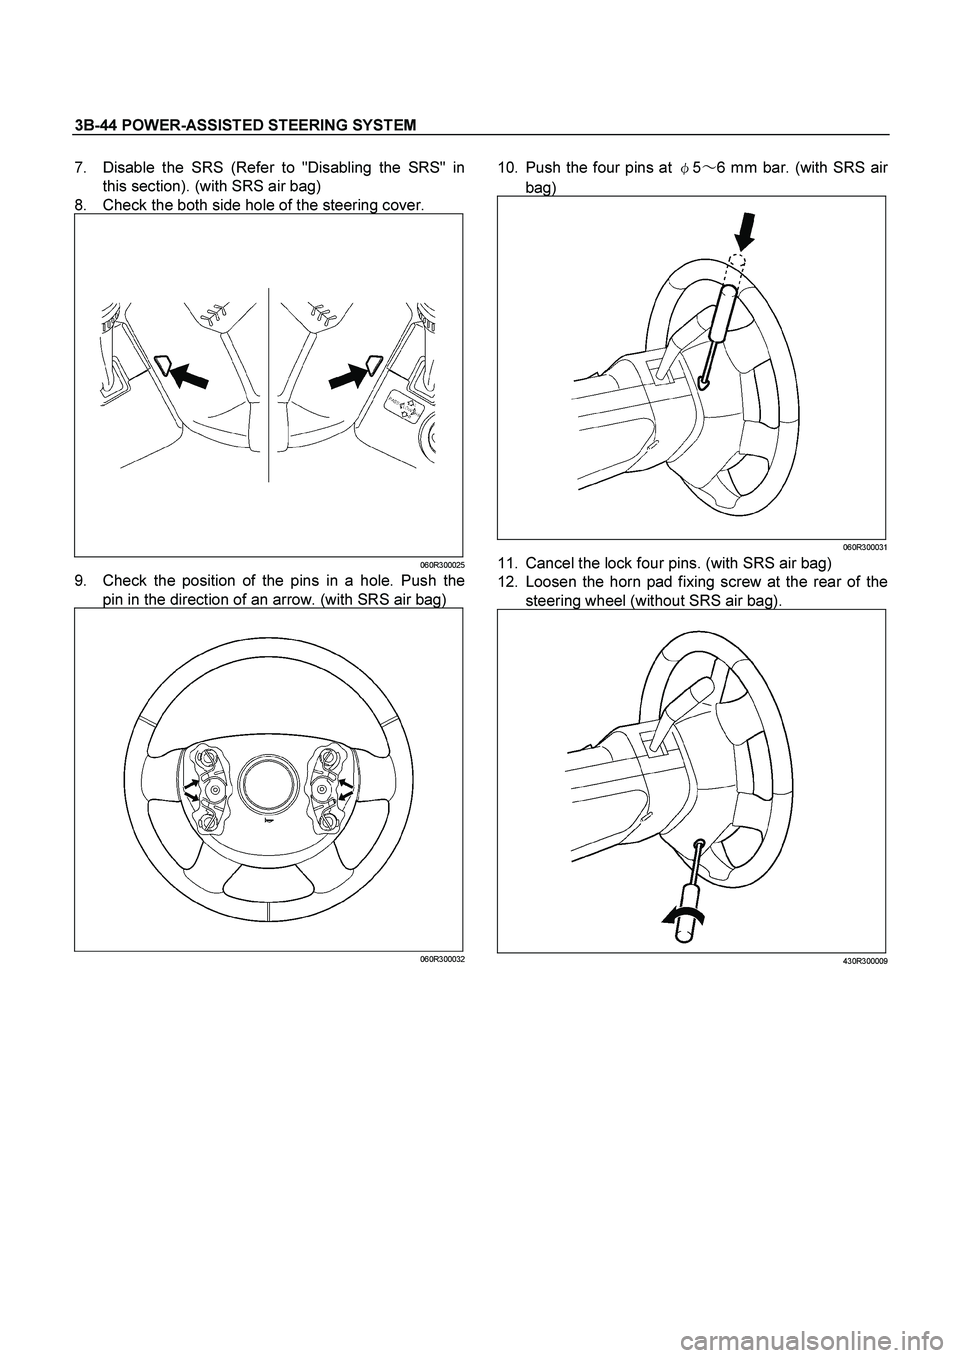 ISUZU TF SERIES 2004  Workshop Manual 3B-44 POWER-ASSISTED STEERING SYSTEM
 
7.  Disable the SRS (Refer to "Disabling the SRS" in
this section). (with SRS air bag) 
8.  Check the both side hole of the steering cover. 
060R300025
9.  Check